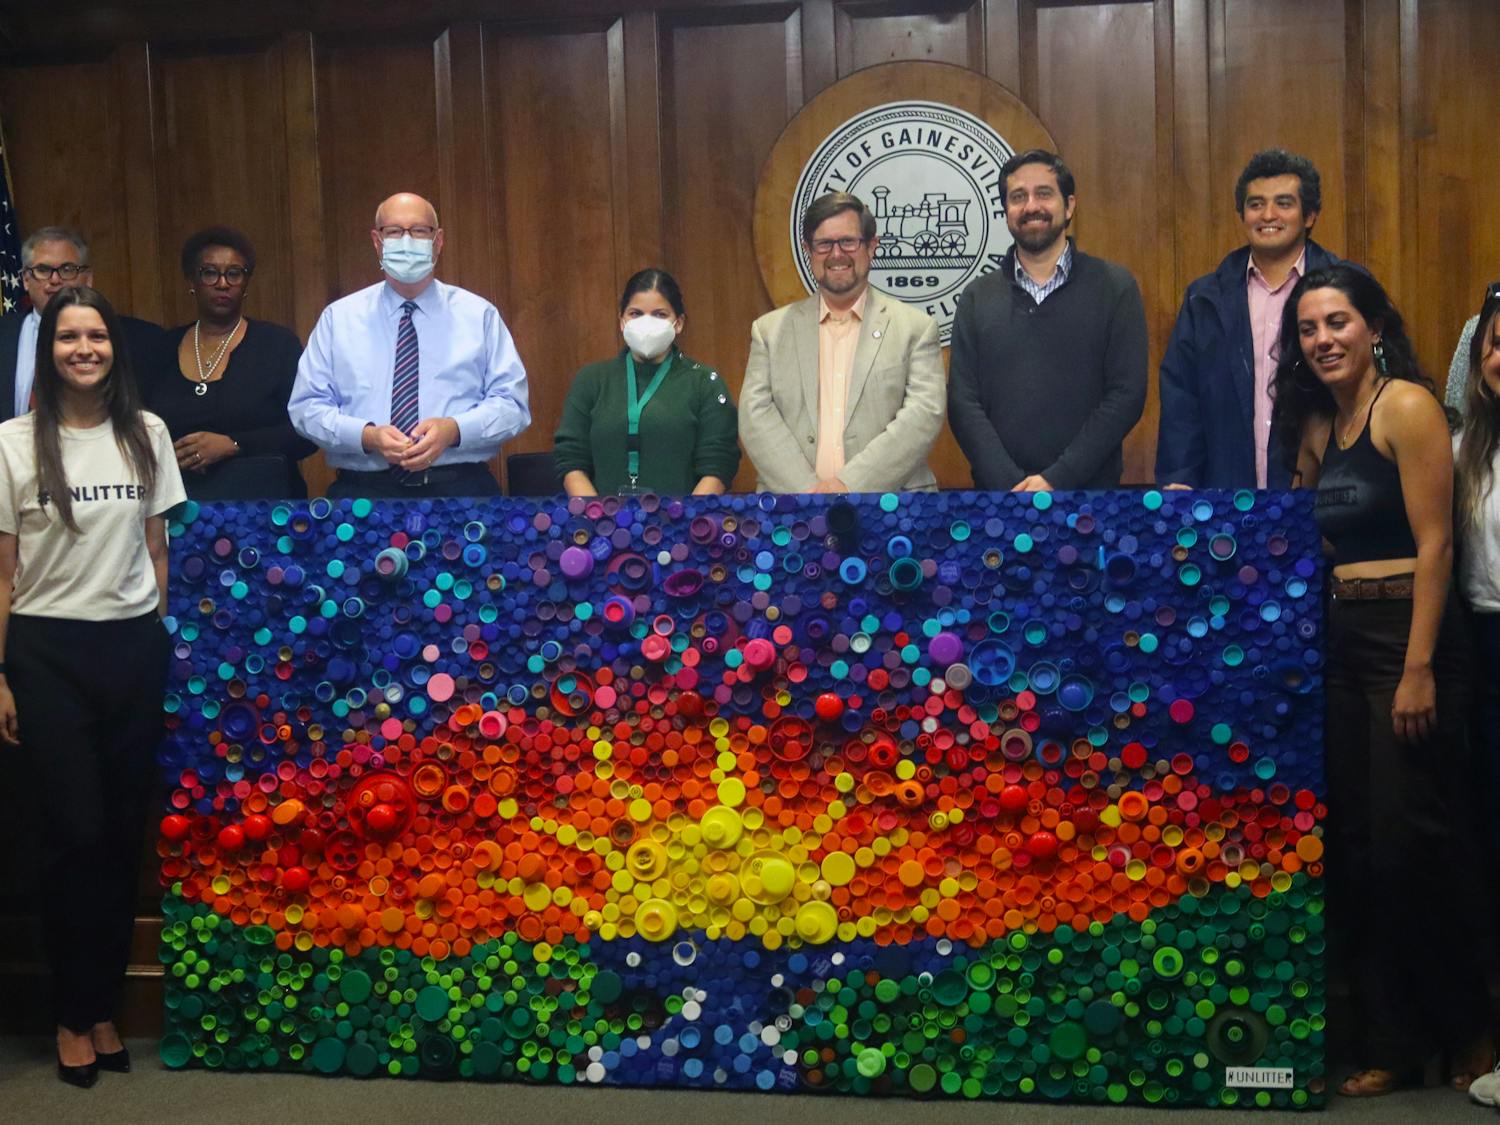 Mayor Lauren Poe, city officials and members of #UNLITTER line up around the bottle cap mural after its unveiling at City Hall Thursday, Oct. 20, 2022.